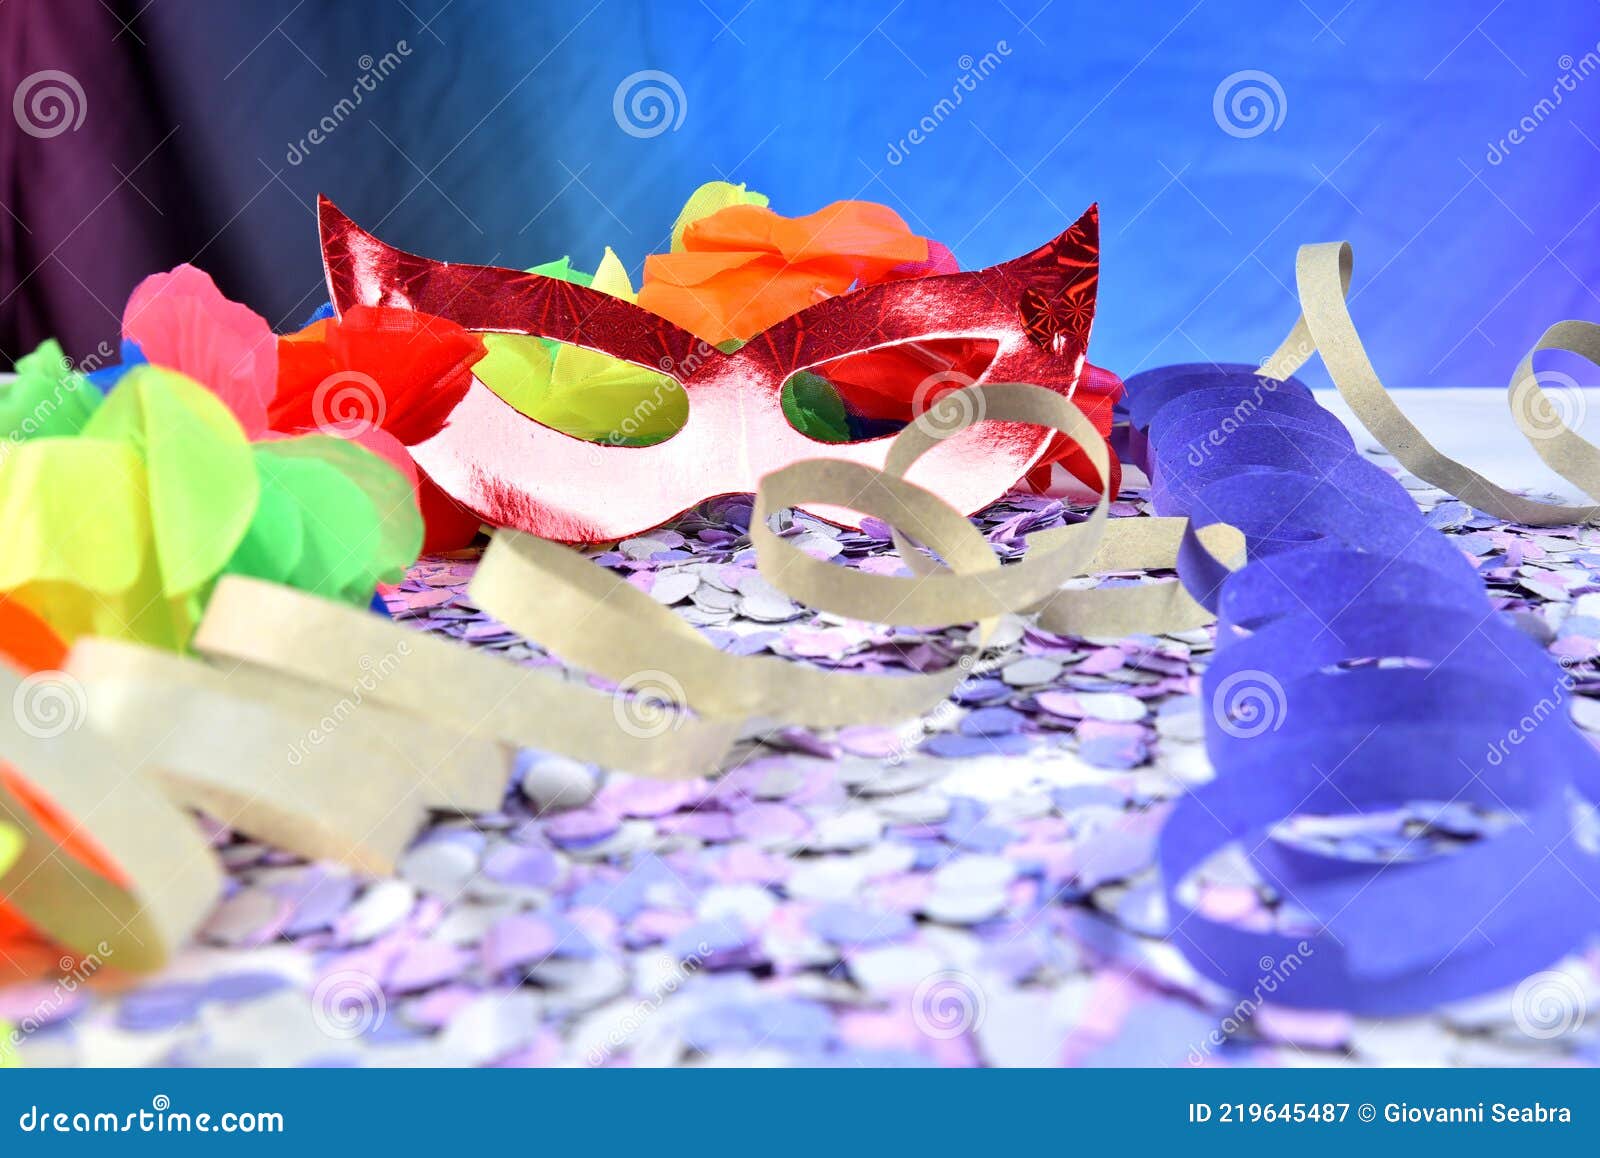 red brazilian carnival party costume mask on colorful confetti background with space for text